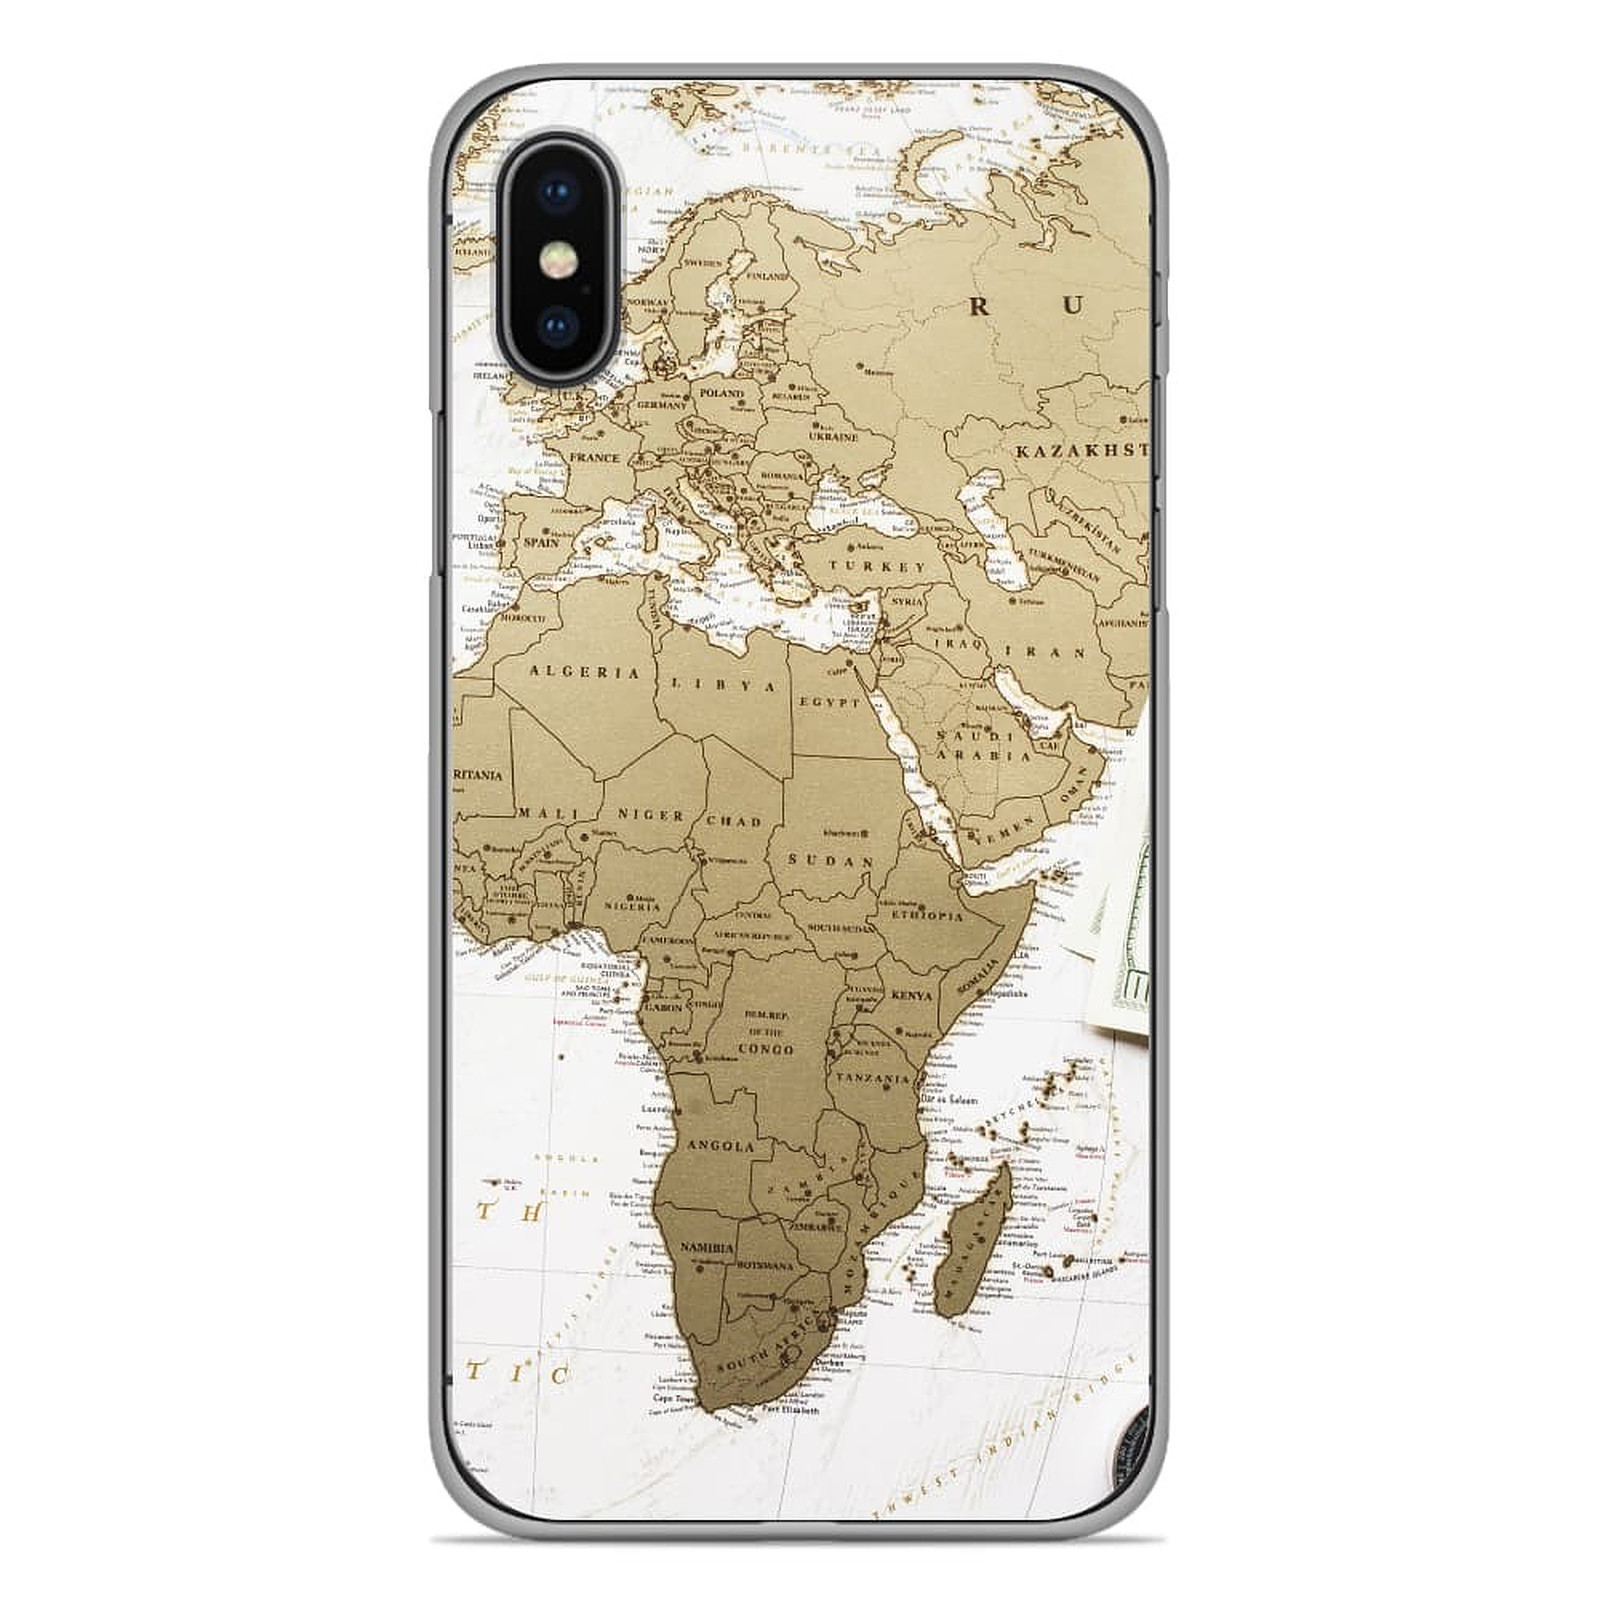 1001 Coques Coque silicone gel Apple iPhone XS Max motif Map Europe Afrique - Coque telephone 1001Coques